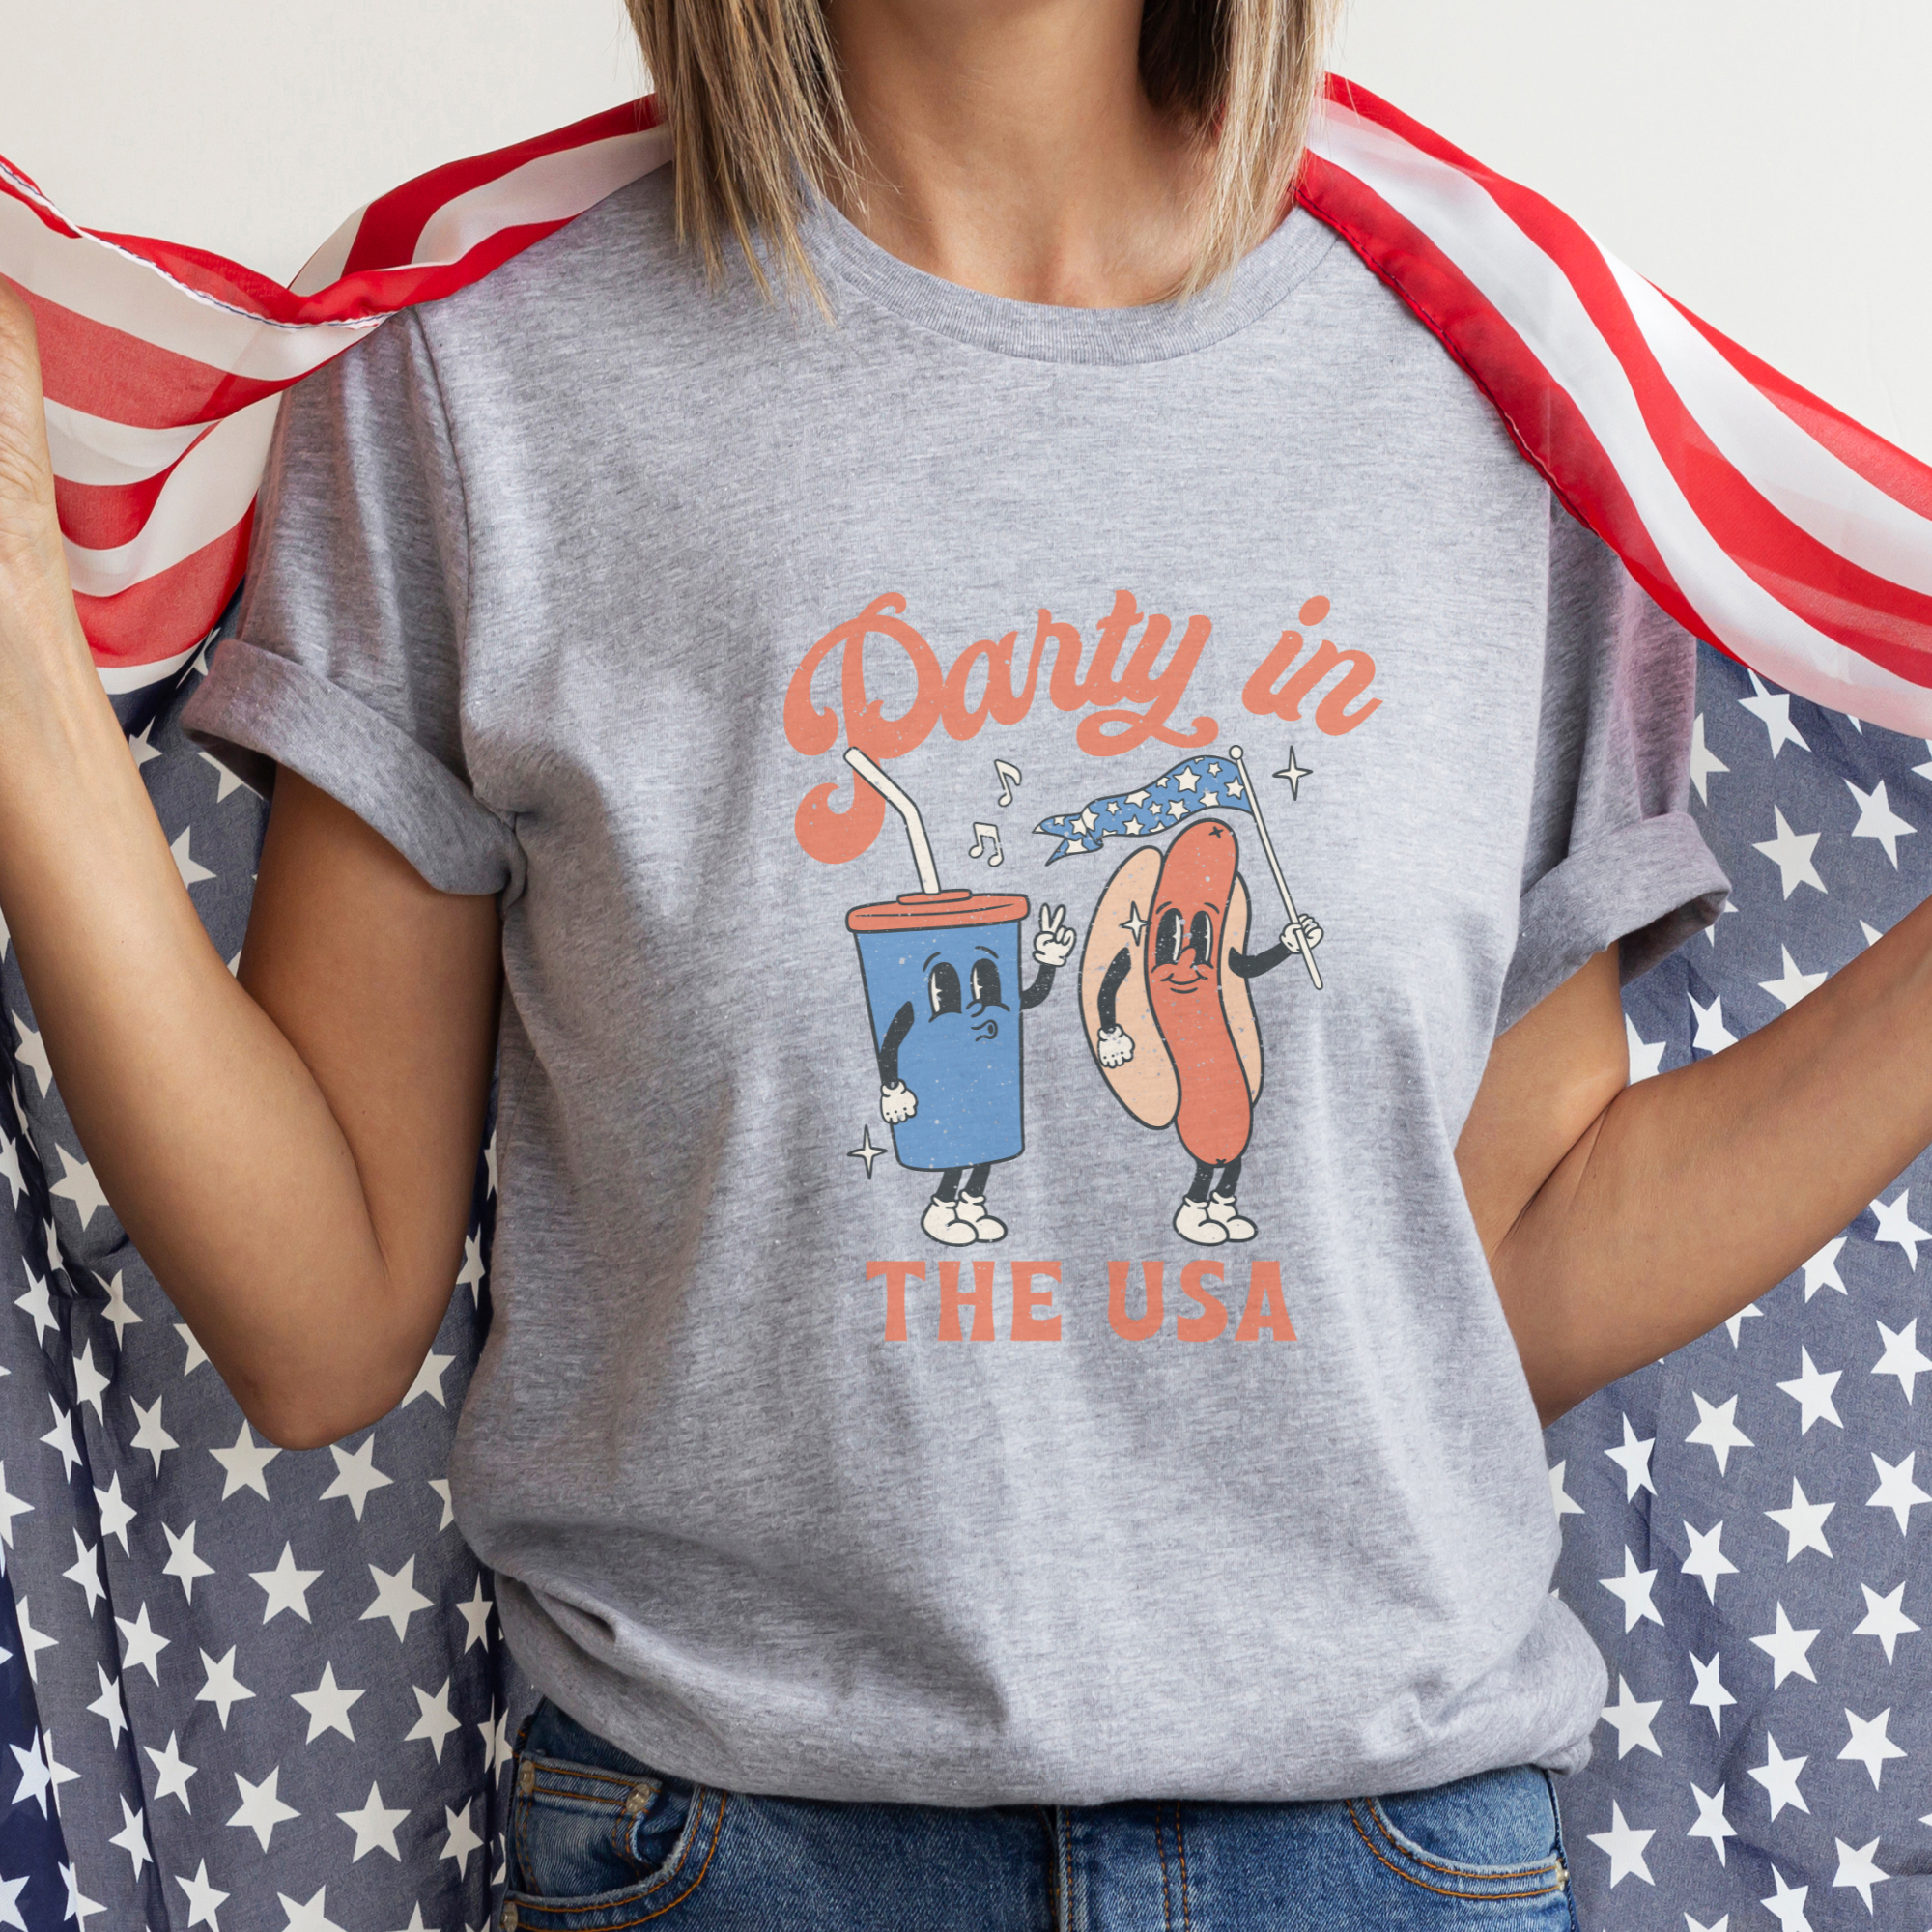 Party in the USA Retro T-Shirt